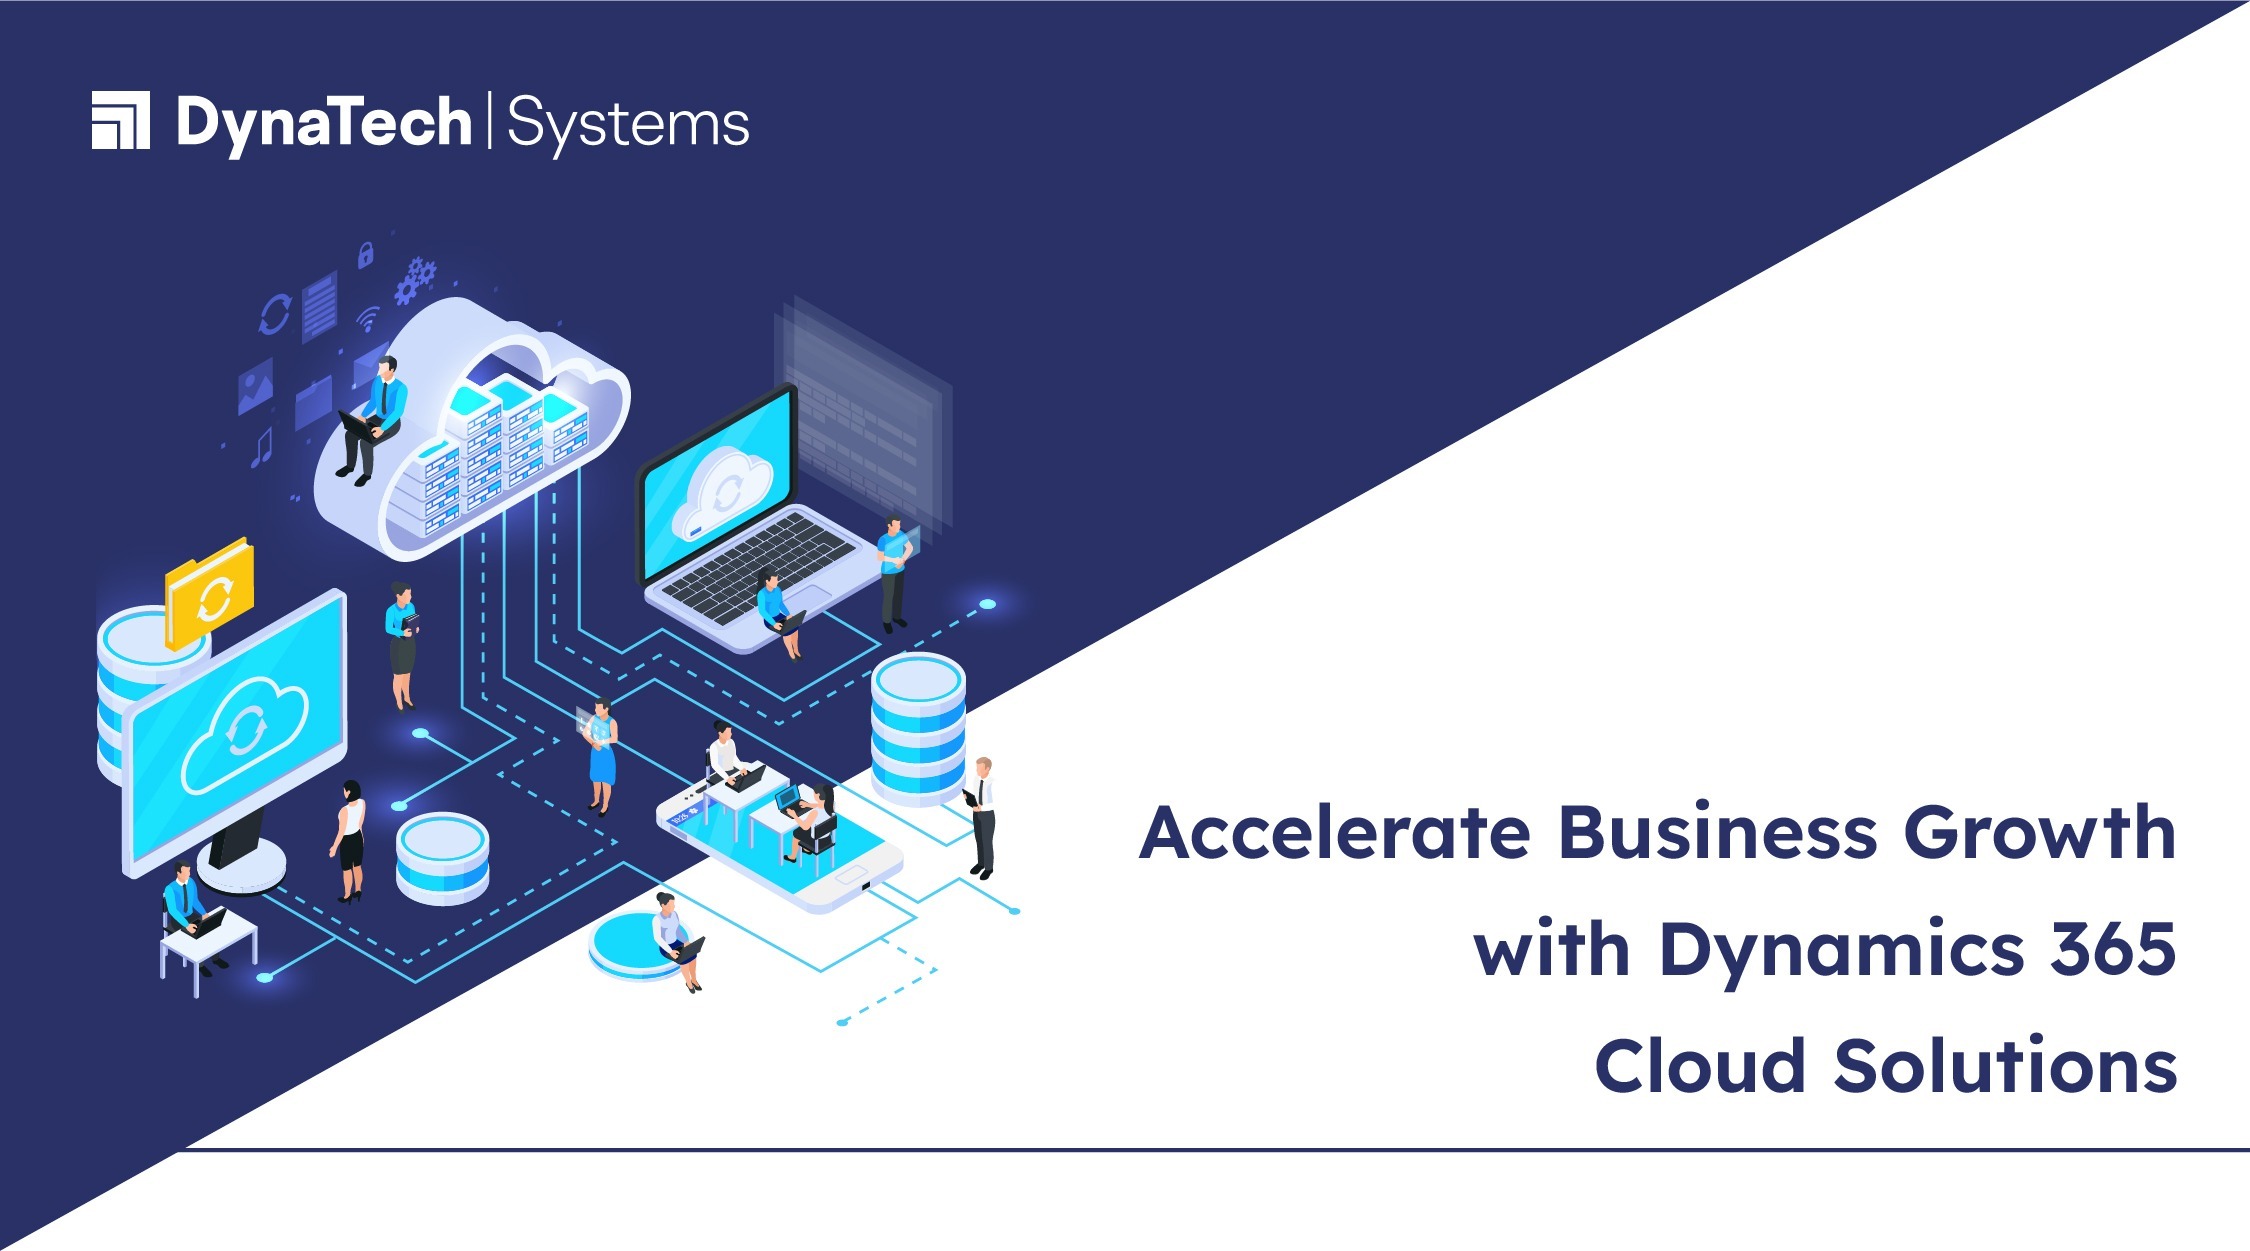 Accelerate Business Growth with Dynamics 365 Cloud Solutions